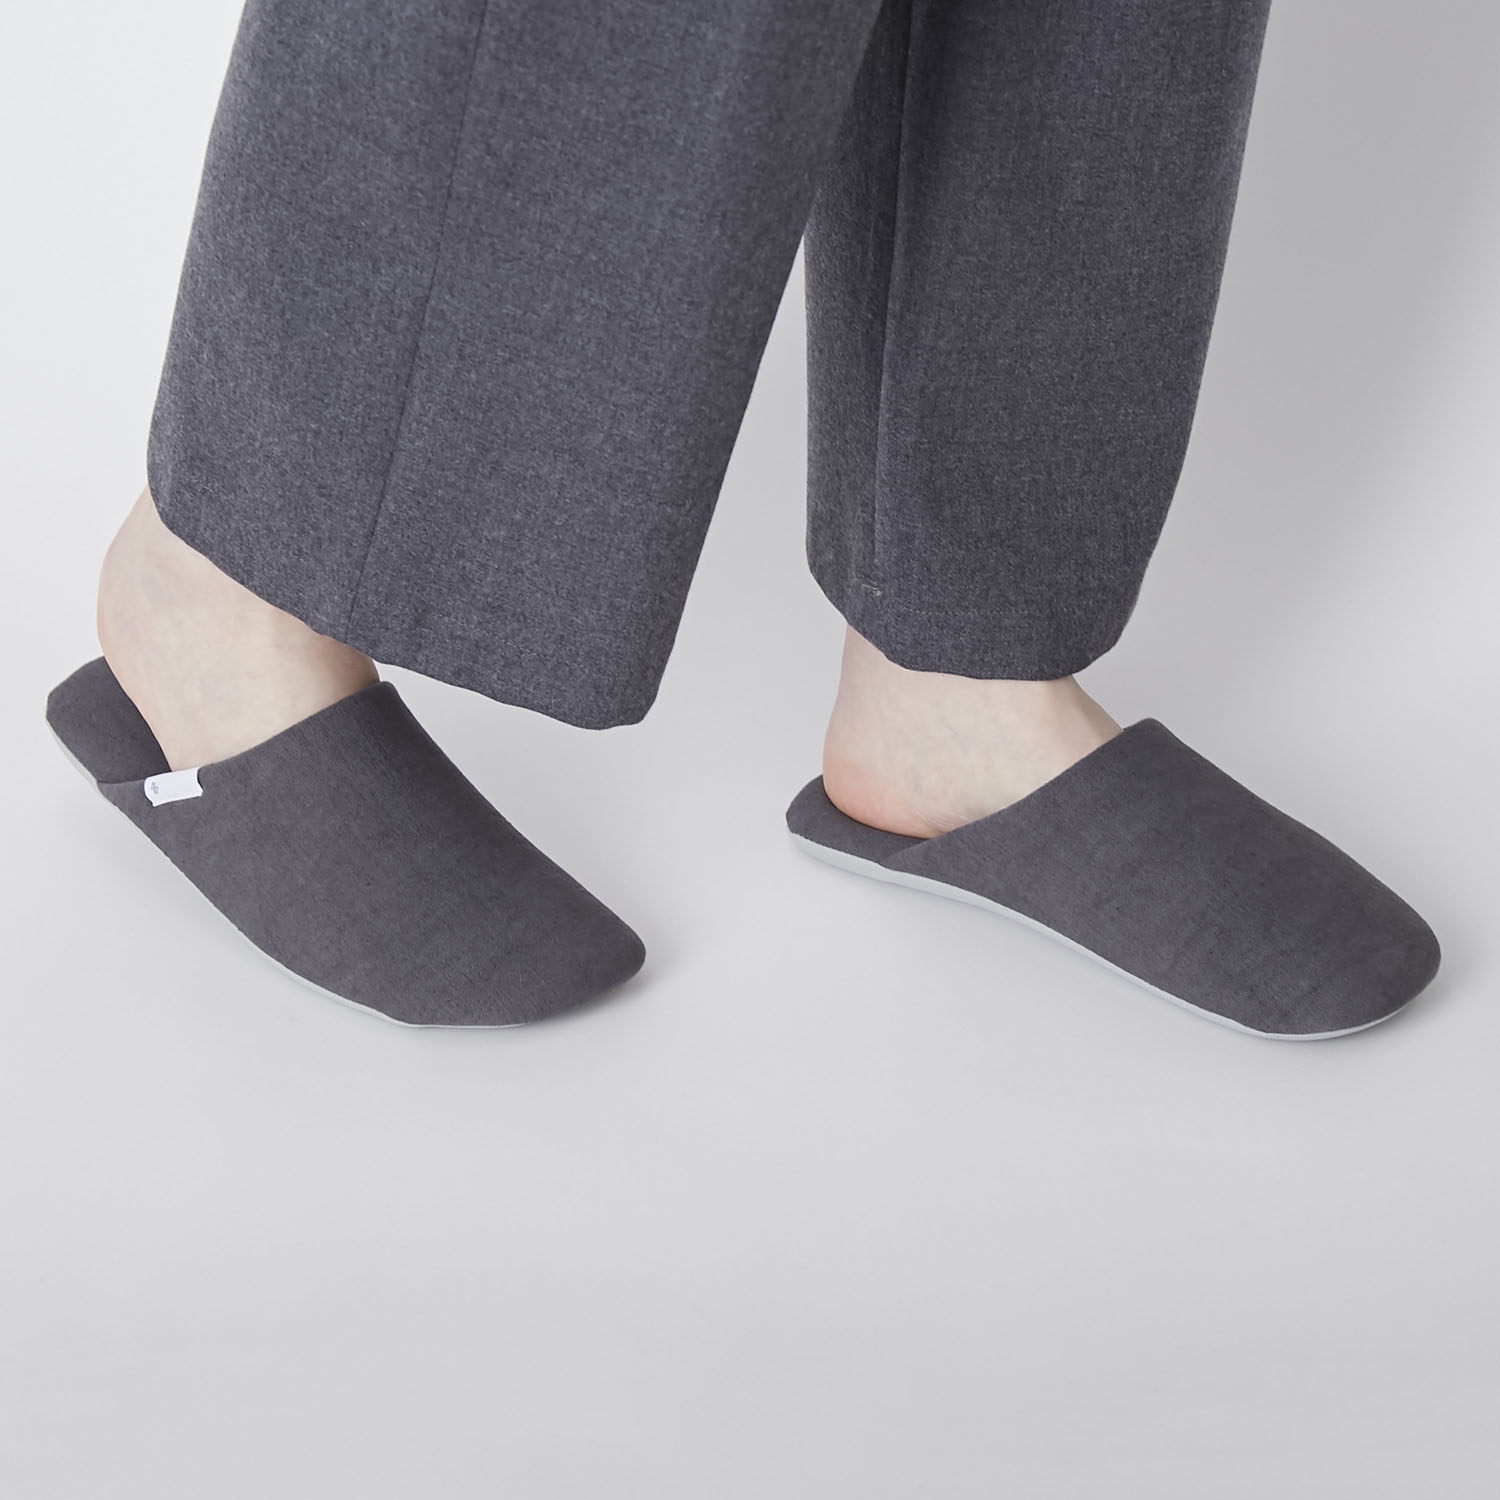 ABE HOME SHOES/脱げにくい綿麻のスリッパ L